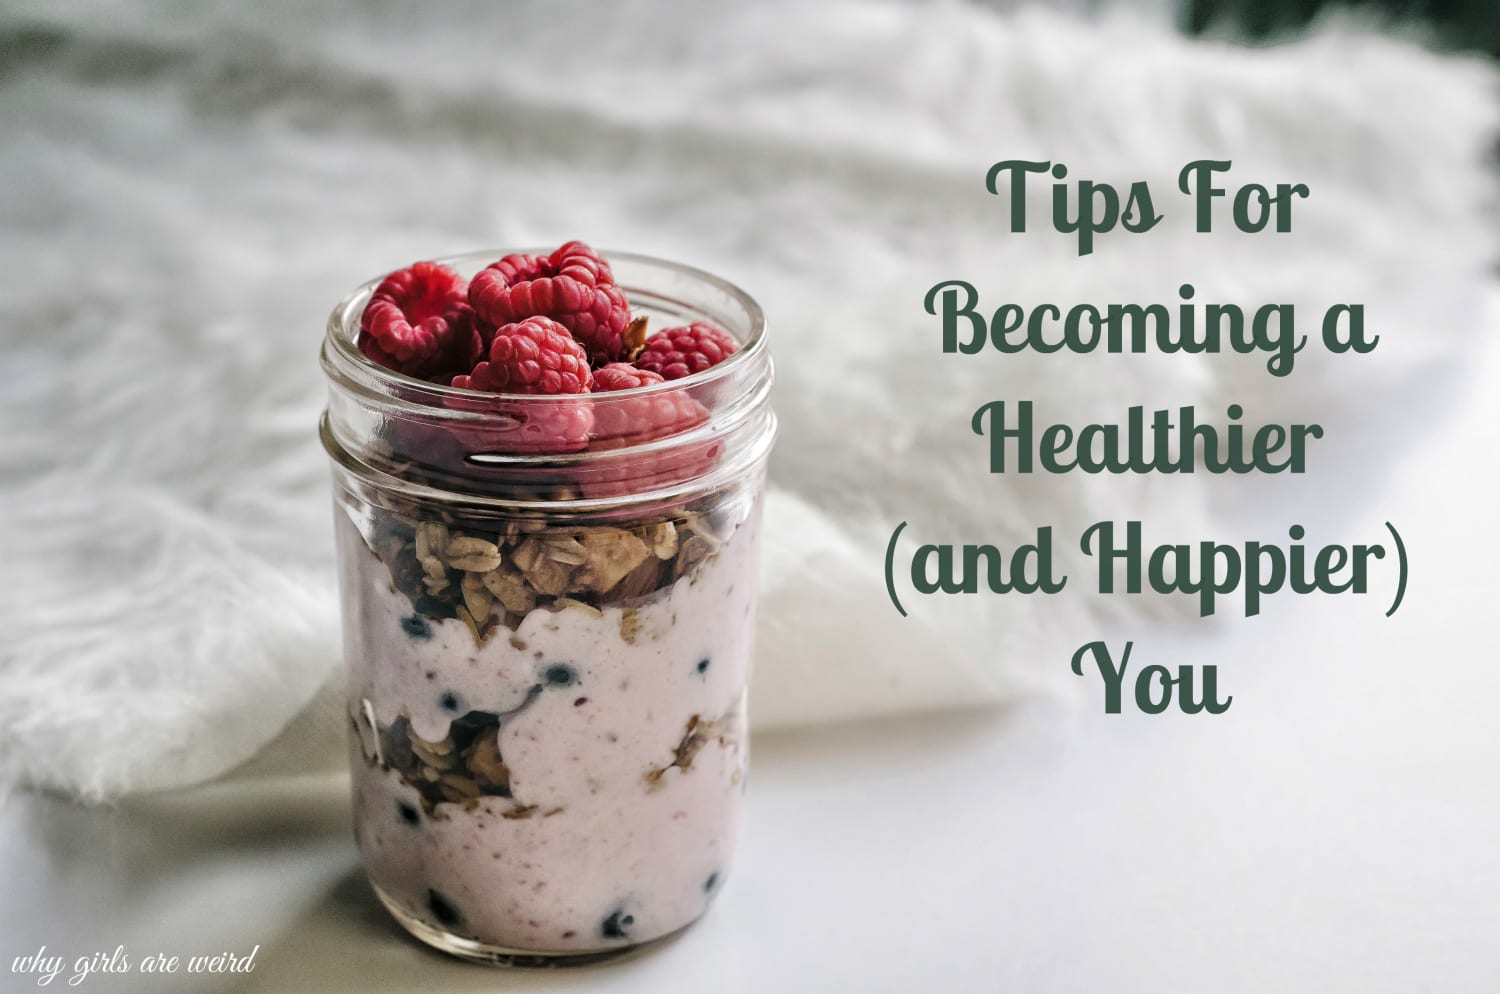 Tips For Becoming a Healthier (and Happier) You